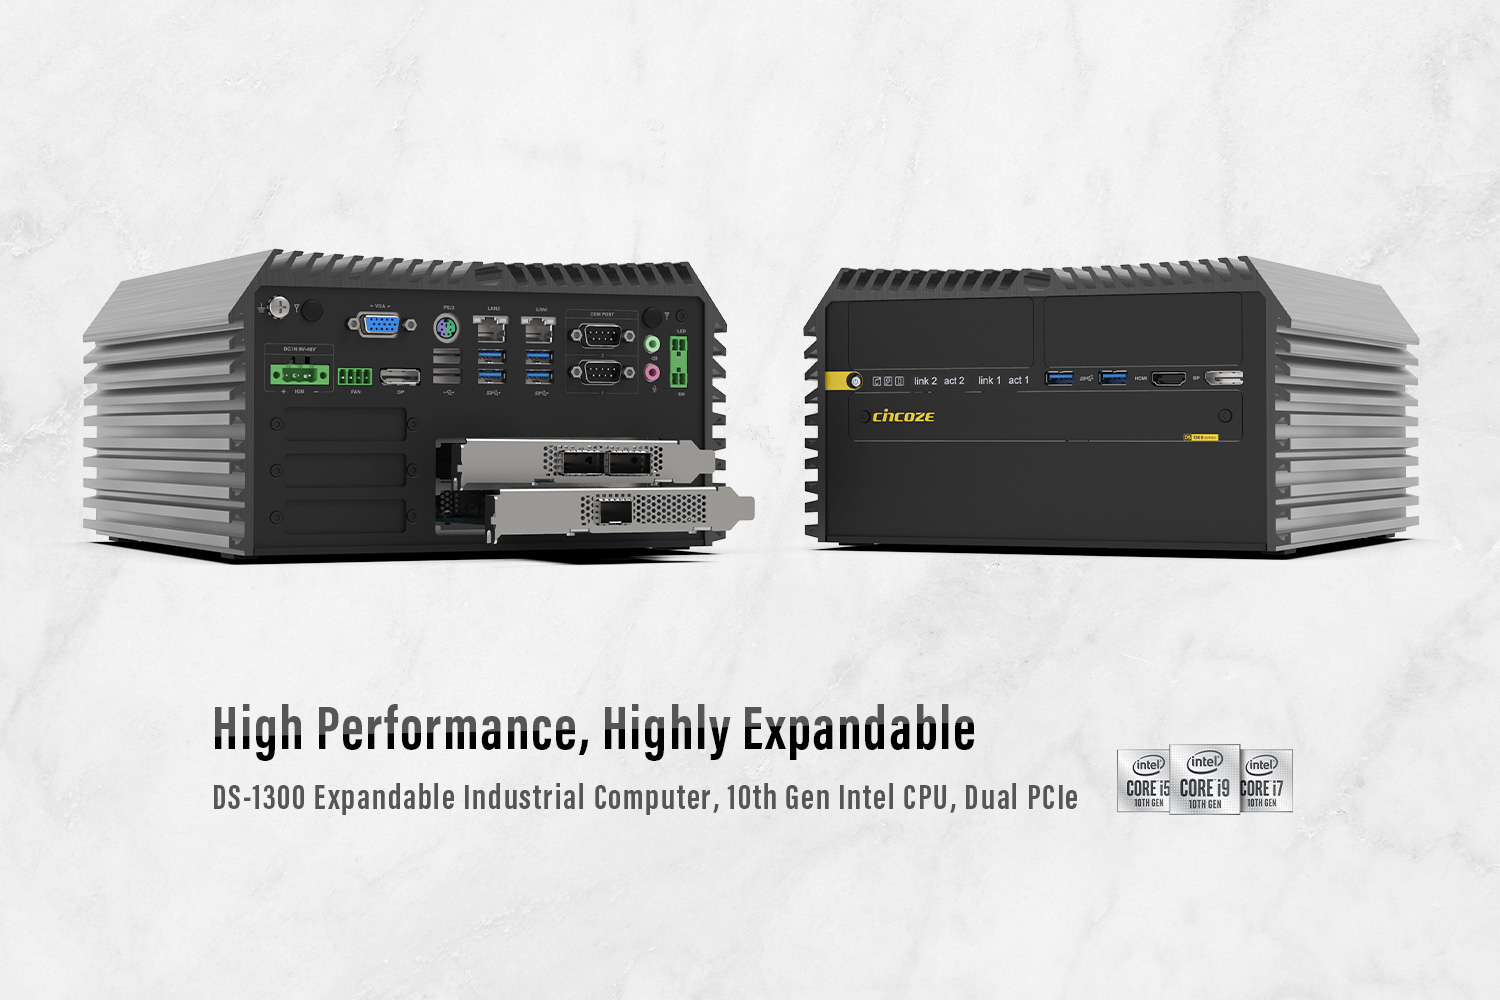 Cincoze Announces 10th Gen Intel® Xeon® Equipped DS-1300 Industrial Computer—Rugged, High Performance, High Expandable